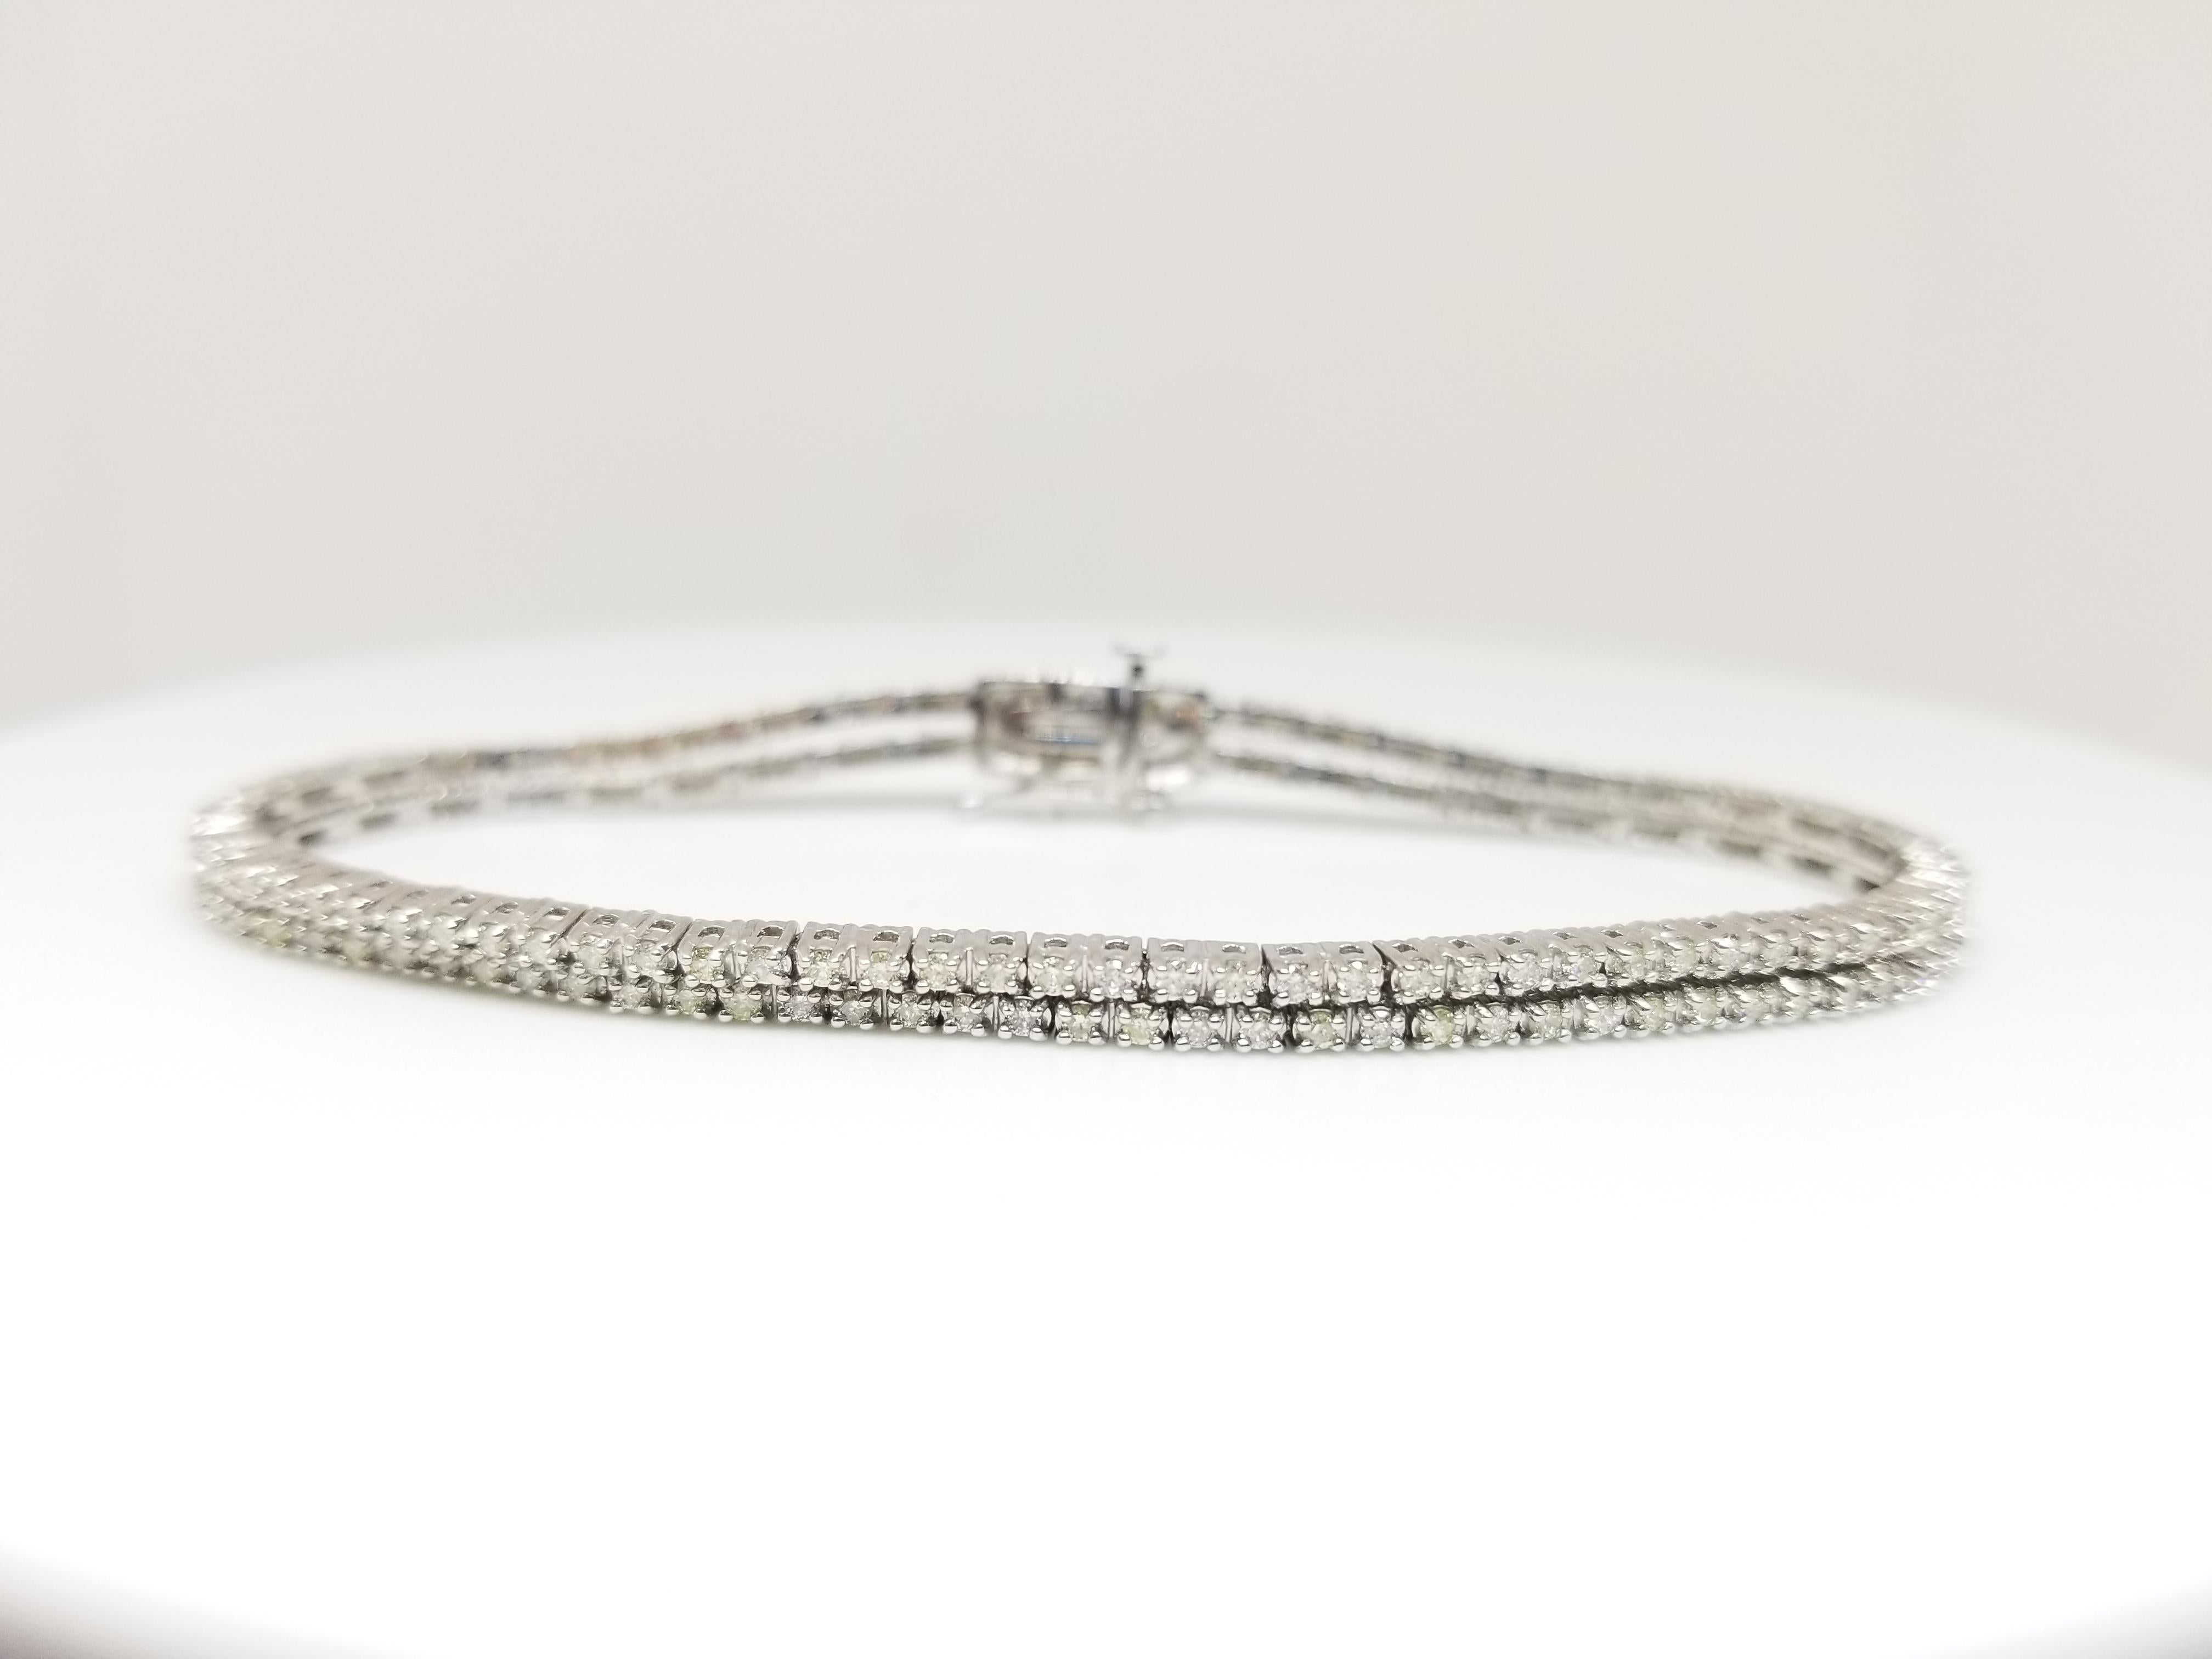 Stunning looking double row tennis bracelet, round-brilliant cut diamonds. set on 14k white gold. each stone is set in a classic four-prong style for maximum light brilliance. Average Display Color I, SI, 7 inch Length